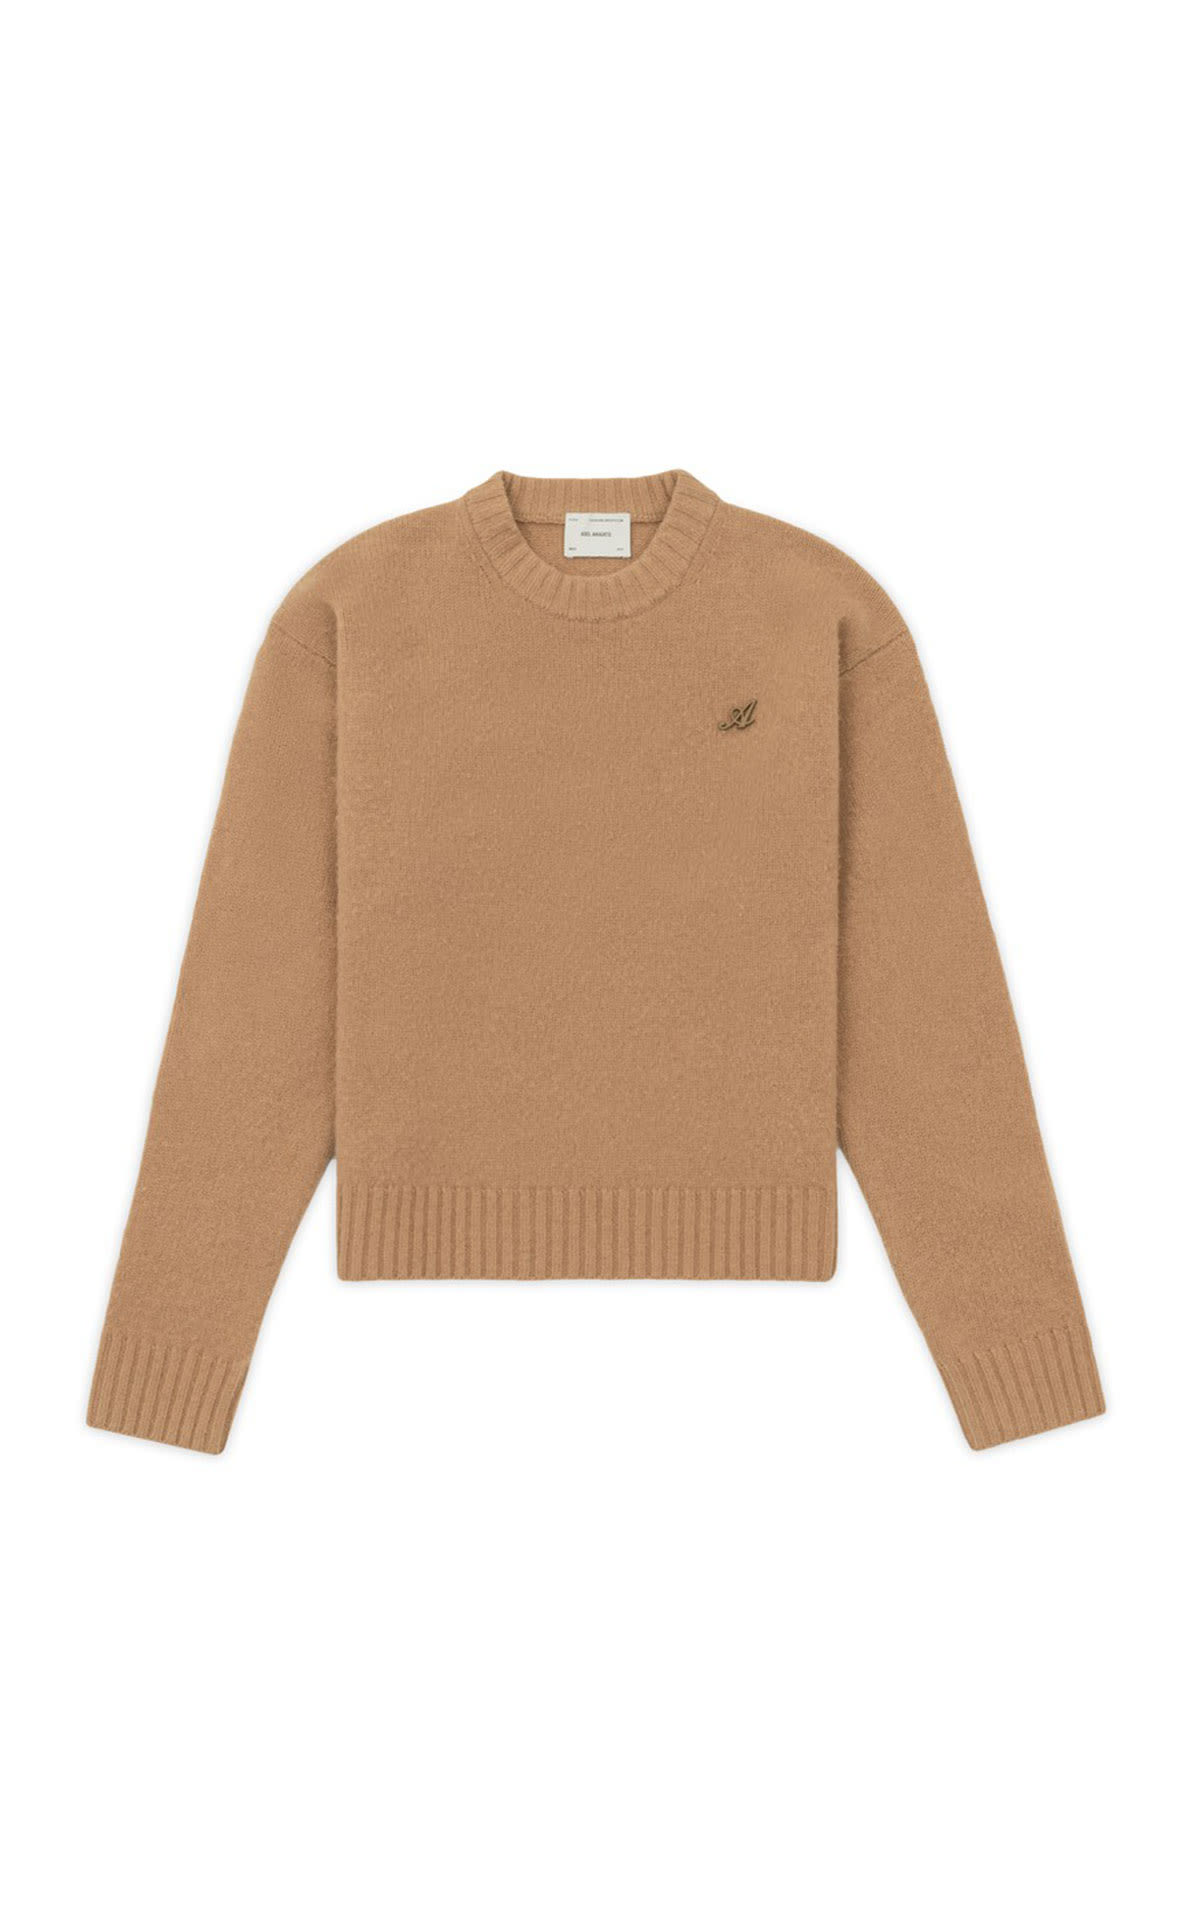 Axel Arigato Beyond sweater womens camel from Bicester Village